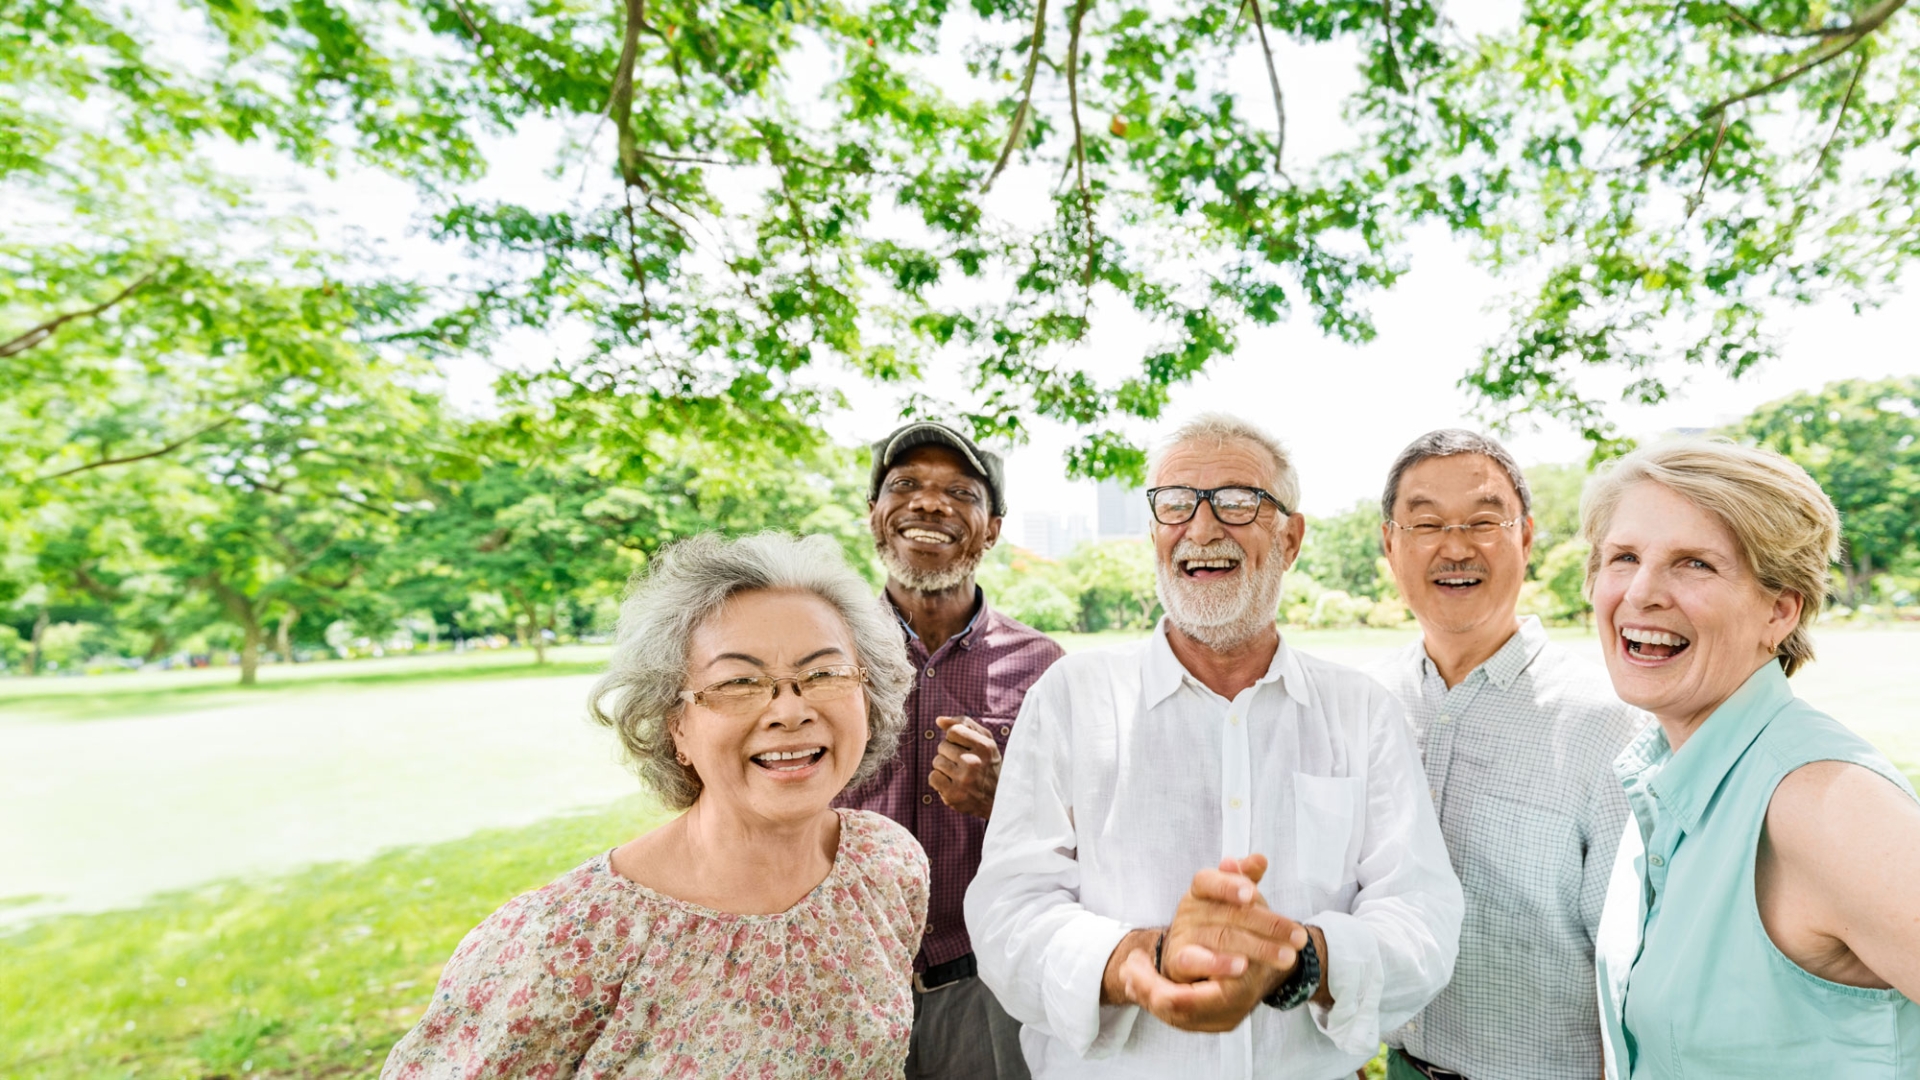 Three older gentlemen and two older ladies smiling in a group outside